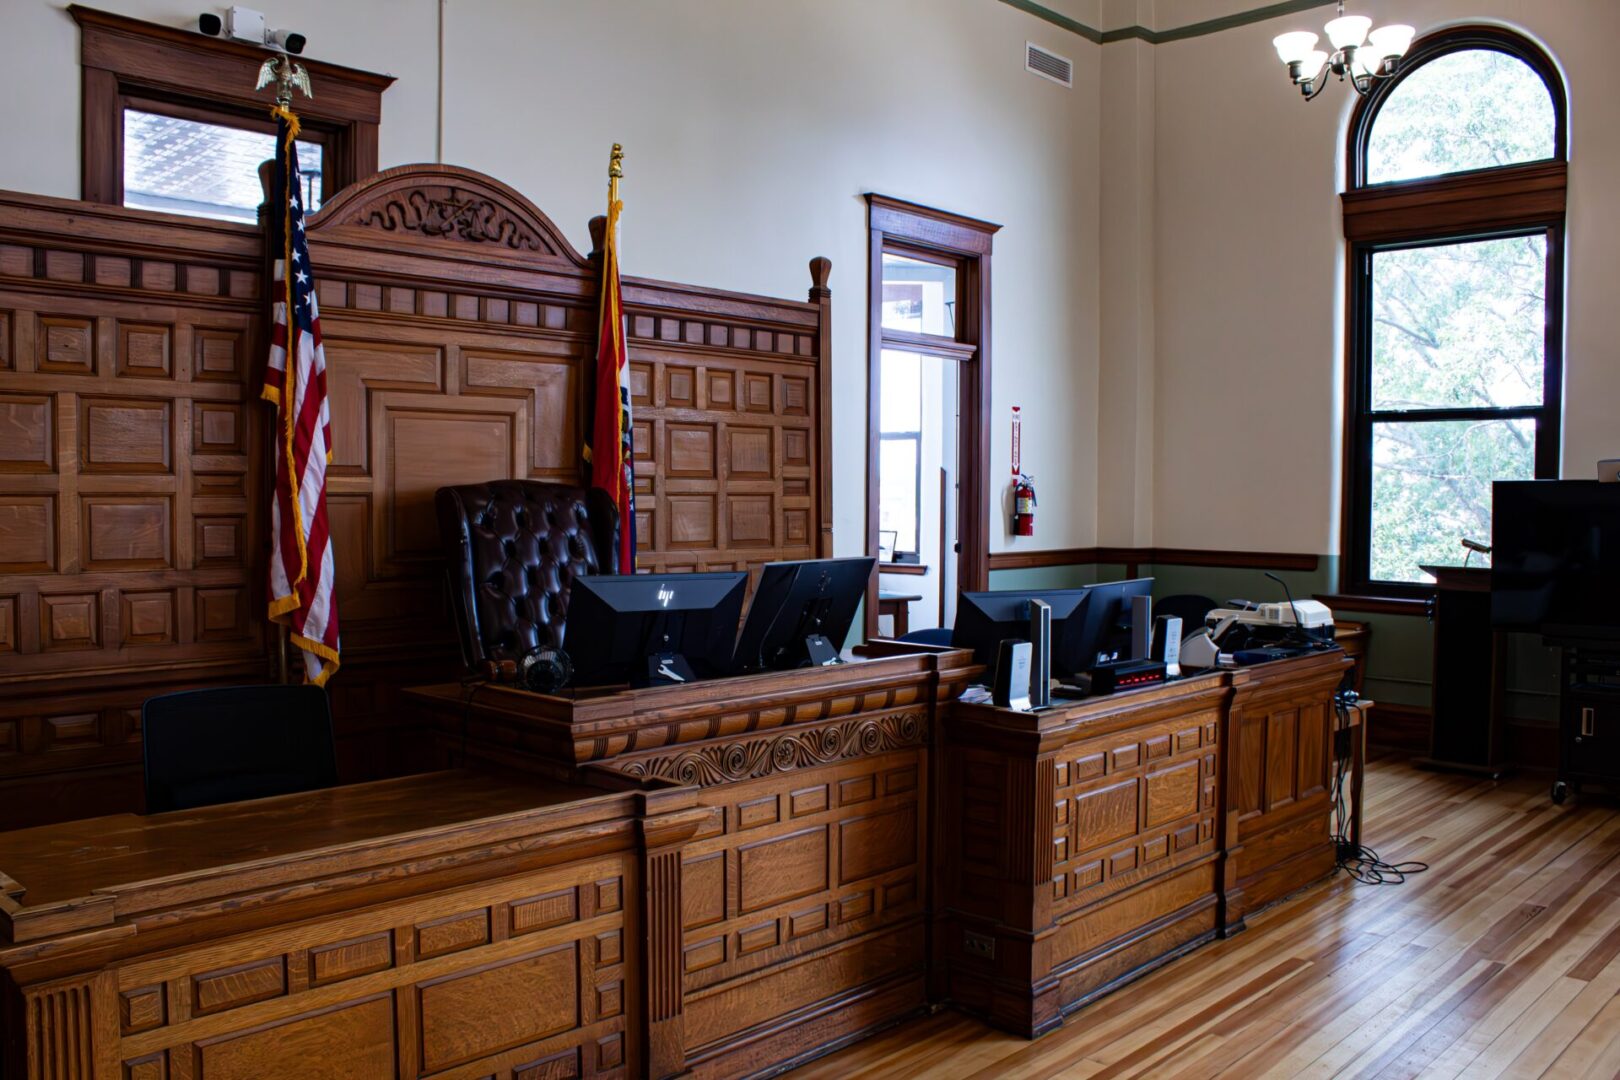 A courtroom with wooden benches and flags on the walls.